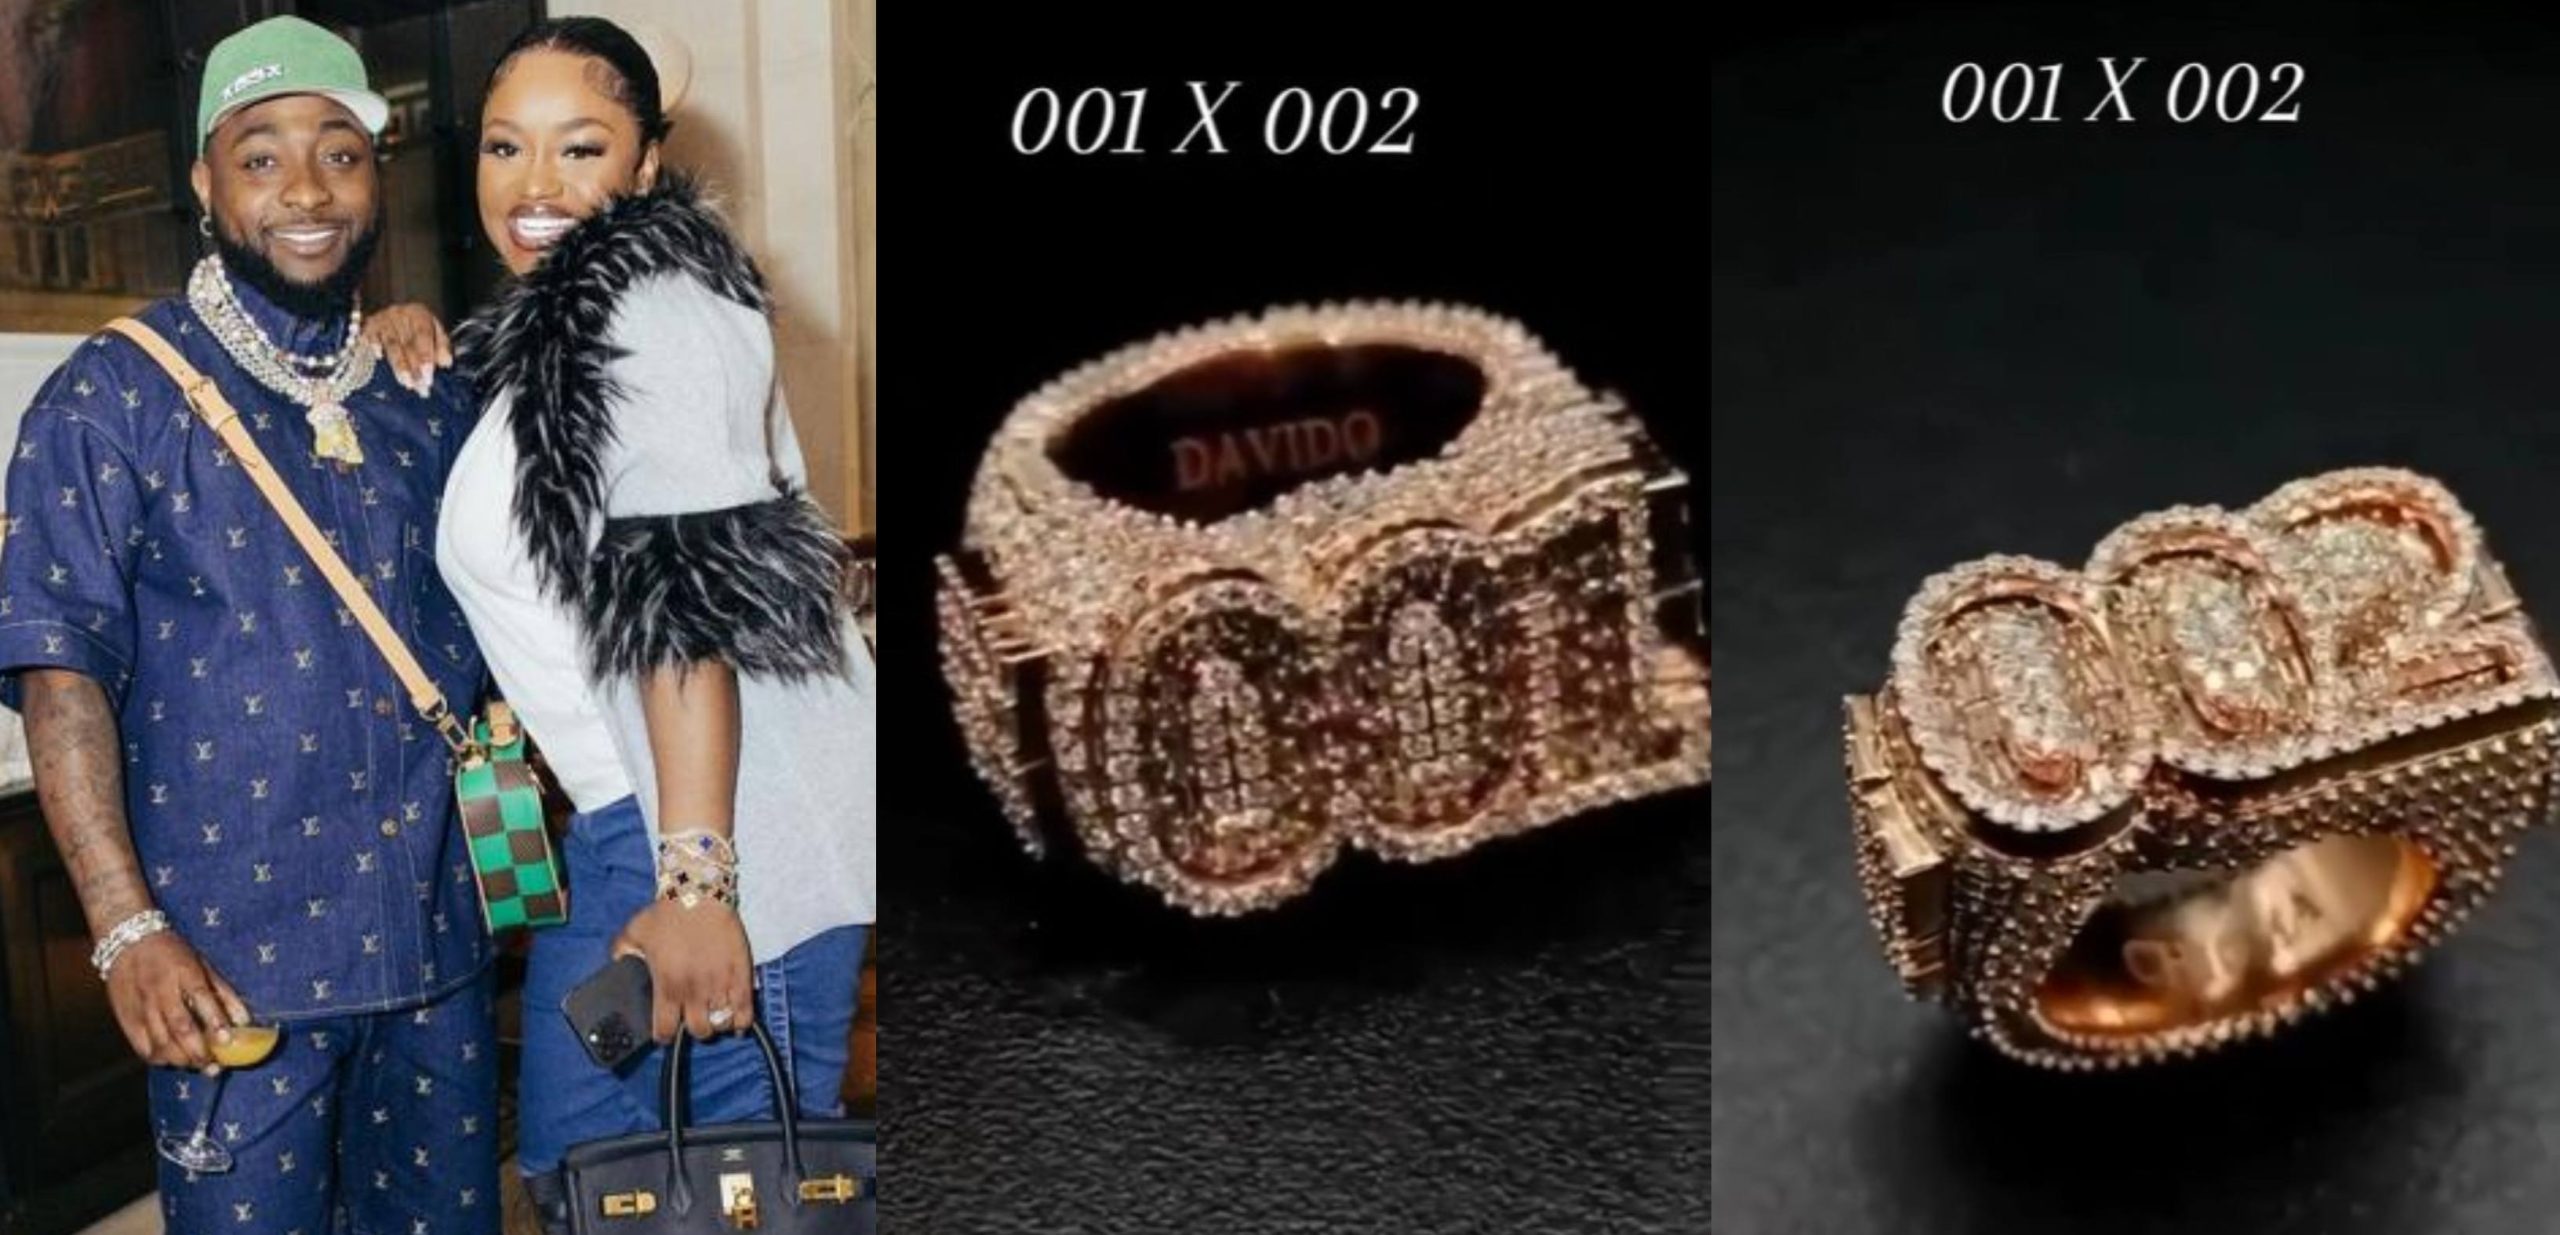 Singer Davido and Chioma newly acquired customized matching rings worth N72M